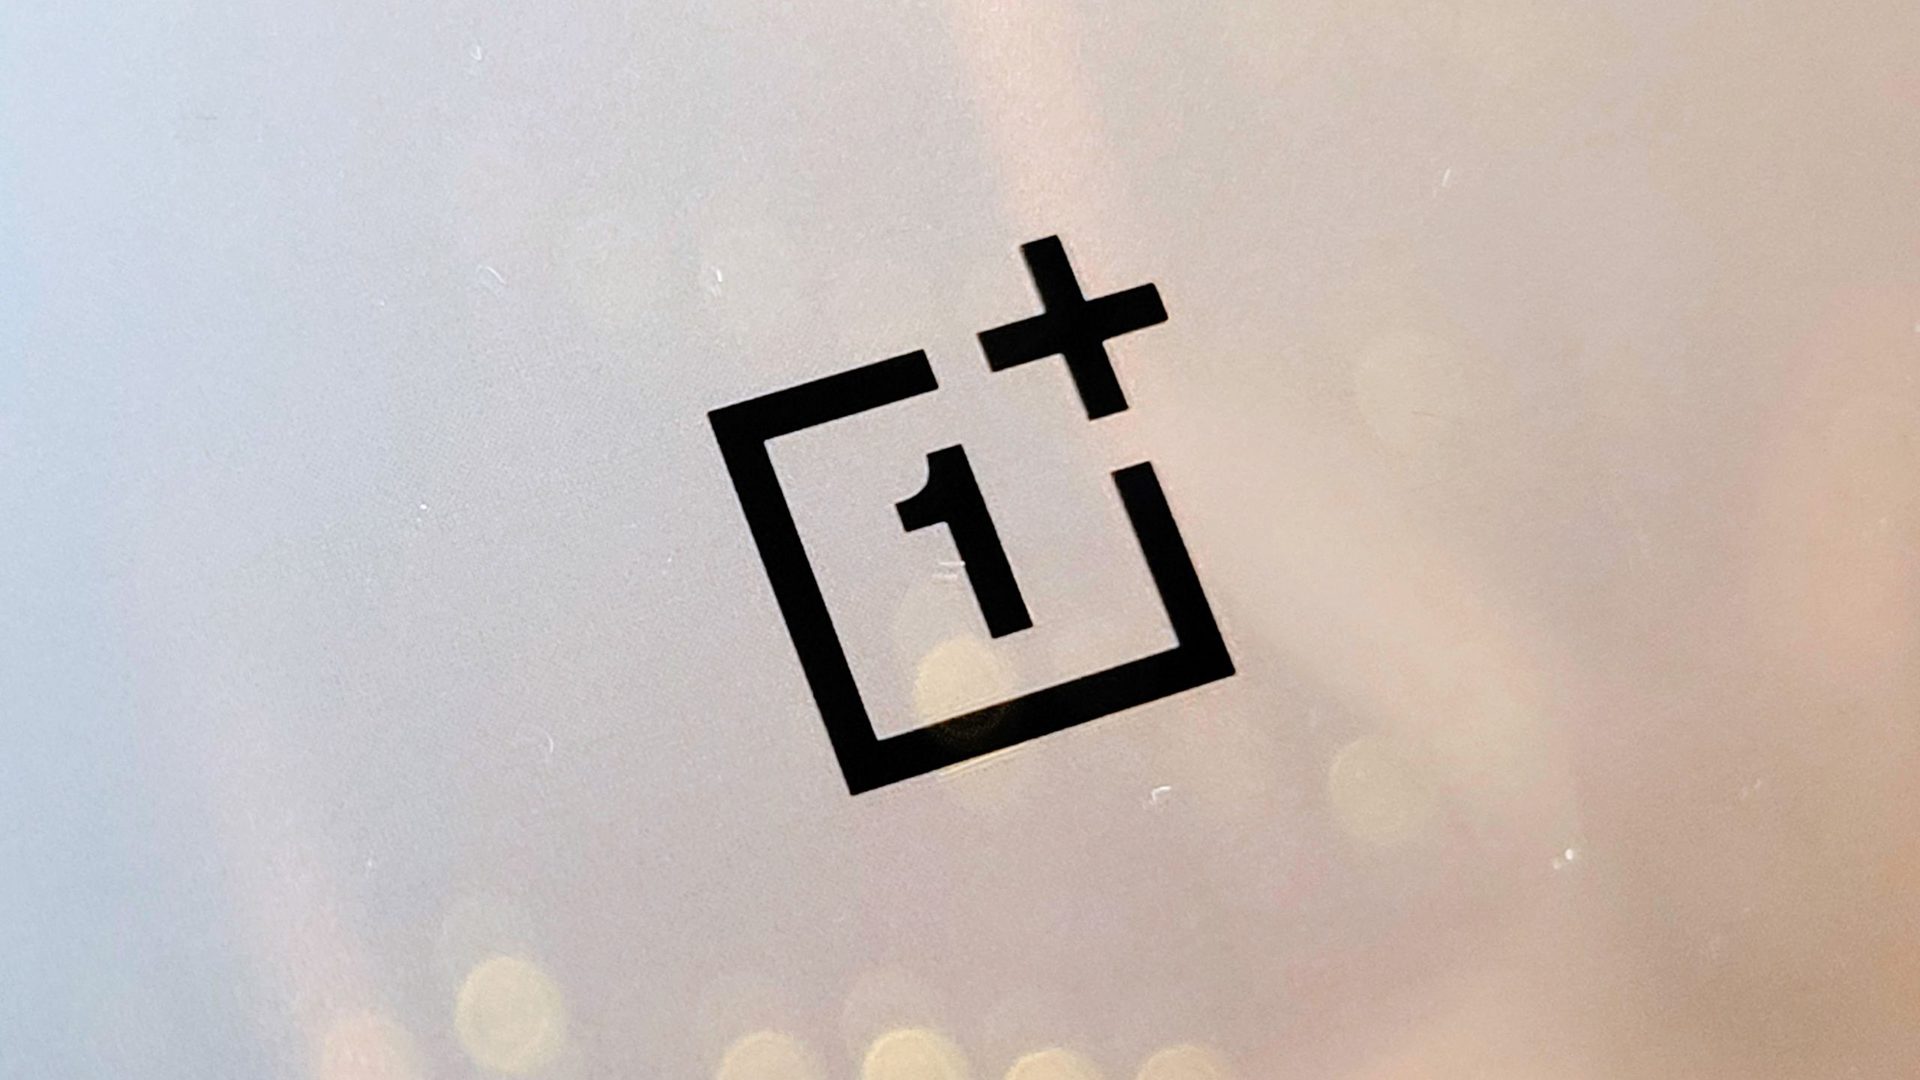 OnePlus could be readying affordable phones with flagship chips